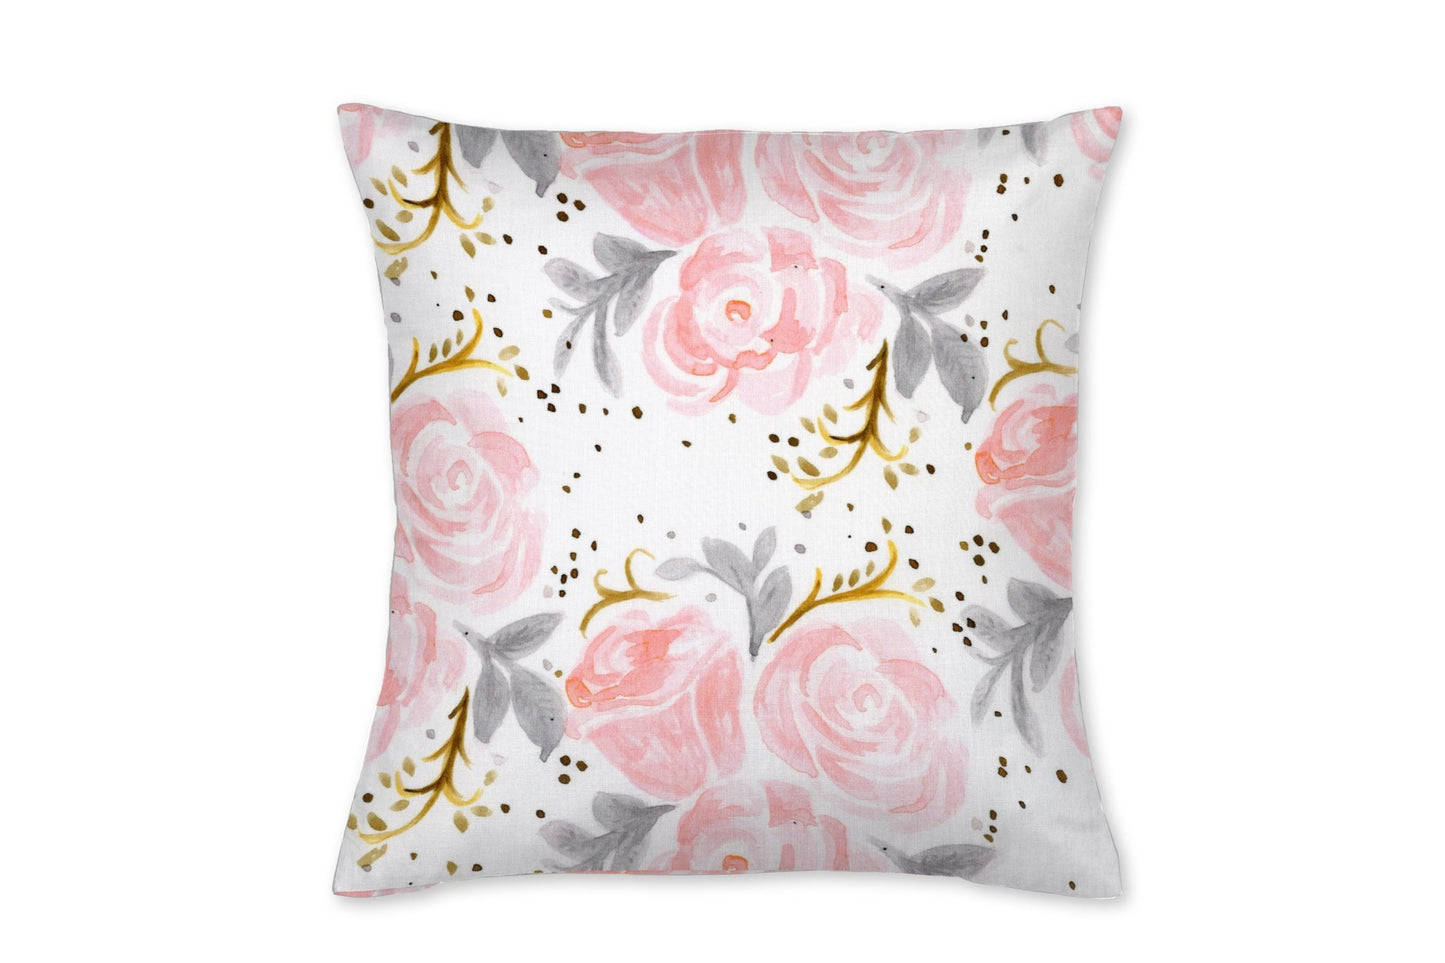 Pink and Gray Rose Throw Pillow - New Arrivals Inc